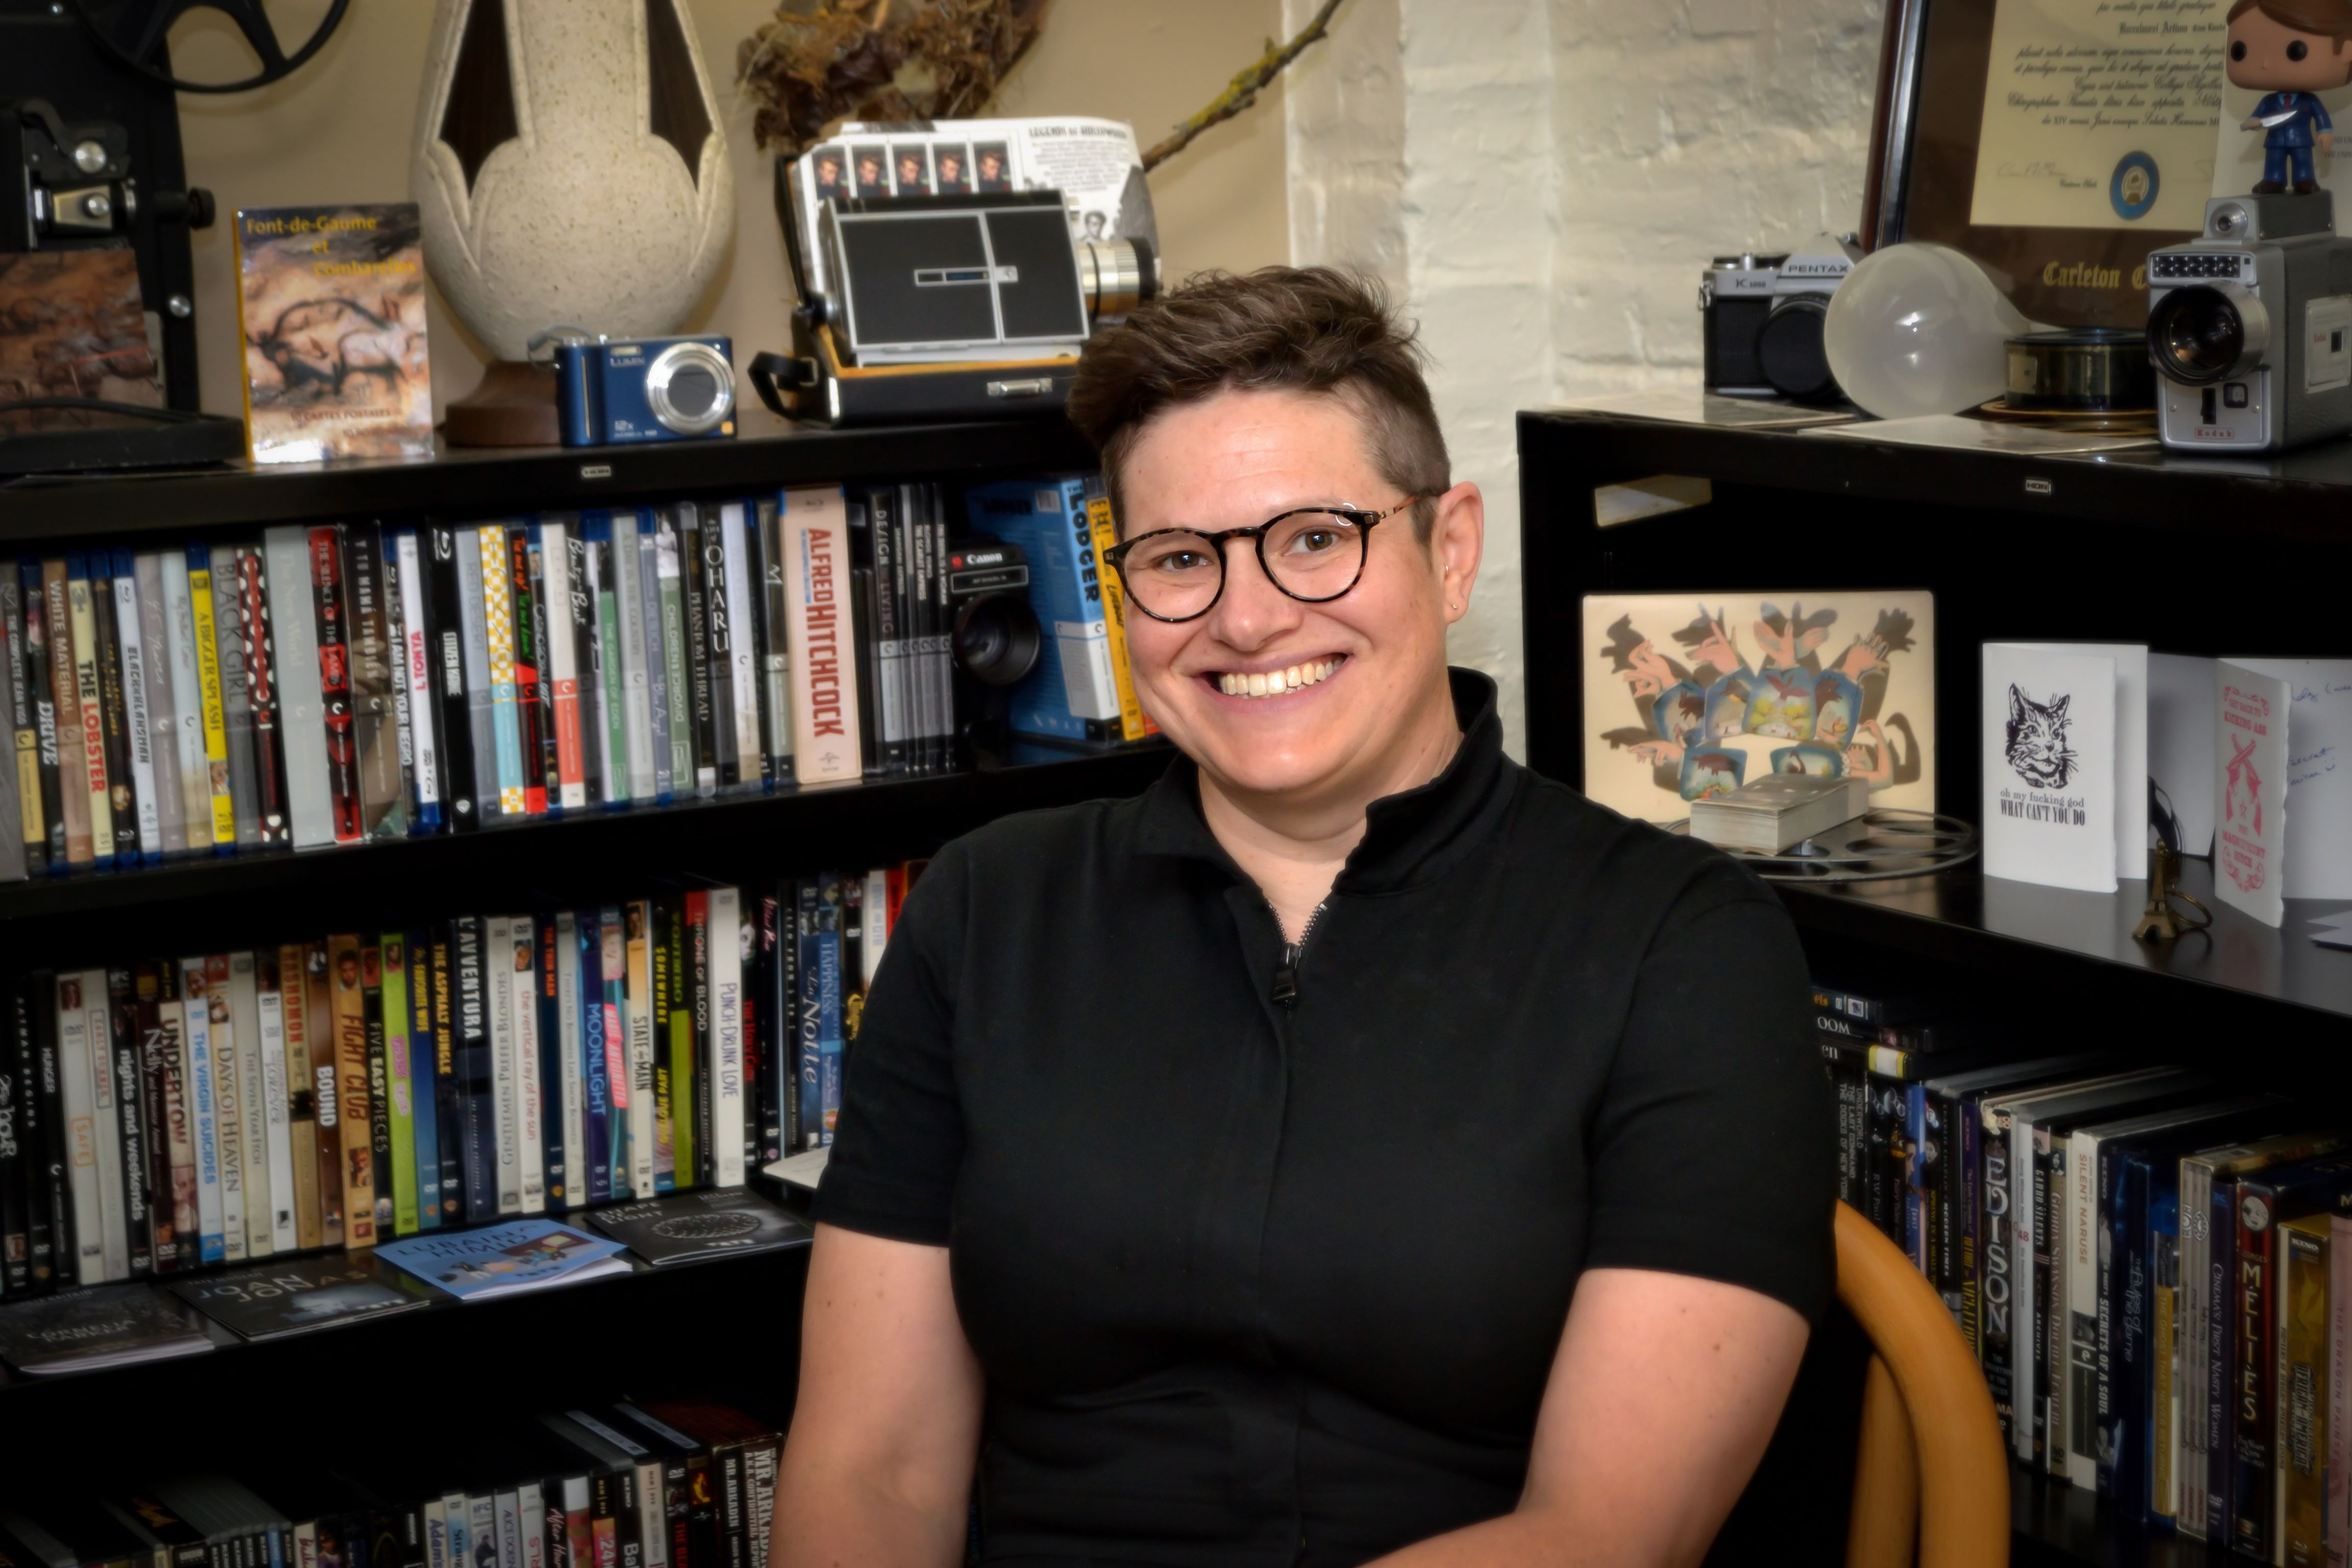 Amy sits in a chair wearing a dark short-sleeved shirt, facing the camera and smiling, with books behind them